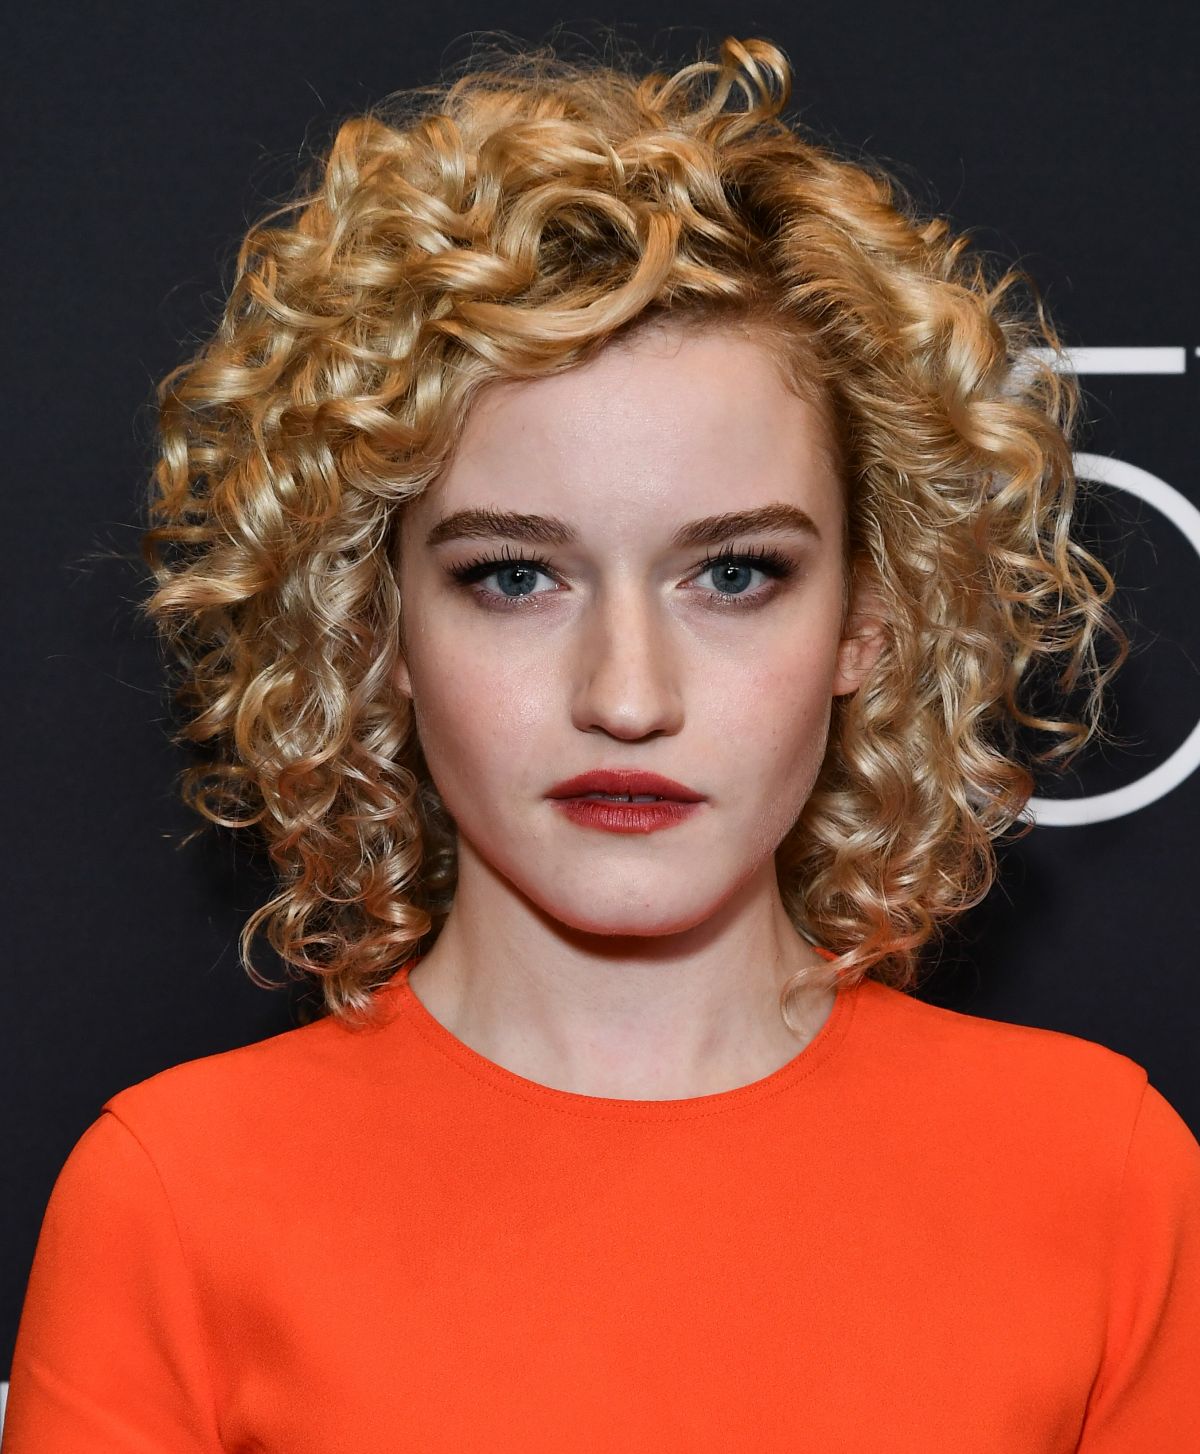 Julia Garner At Hfpa And Instyle Celebrate 75th Anniversary Of The Golden